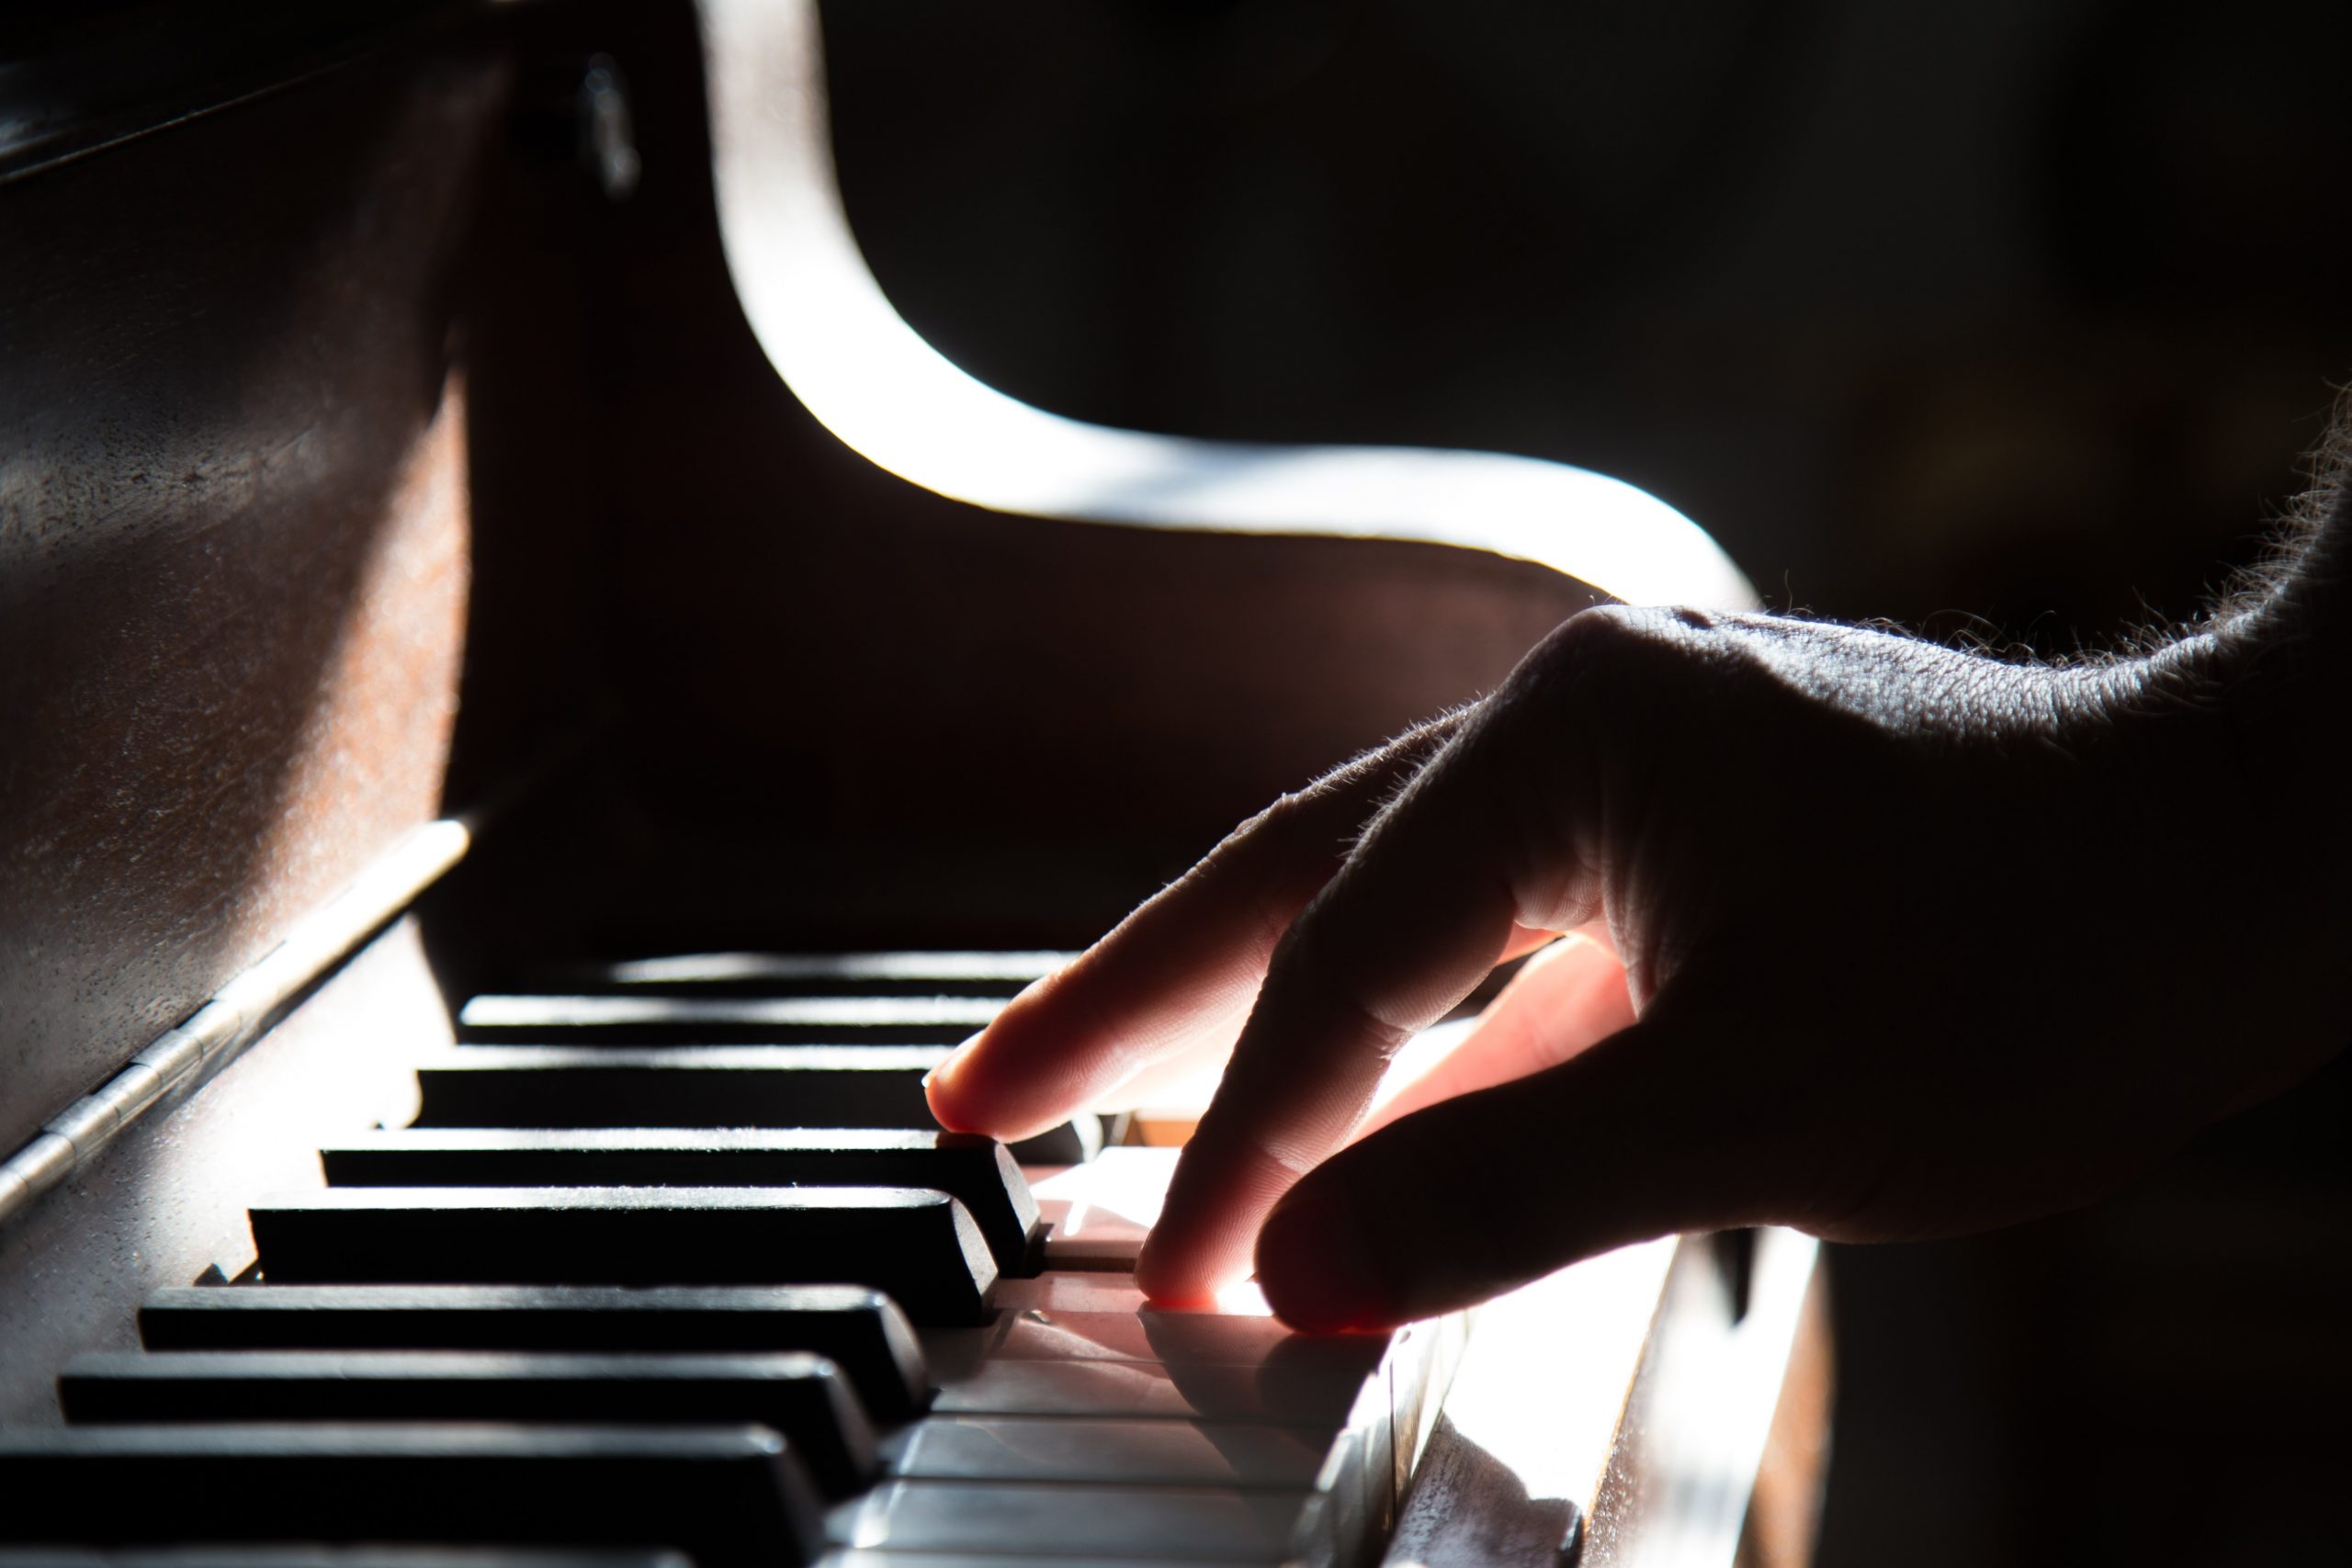 image of someone playing a piano